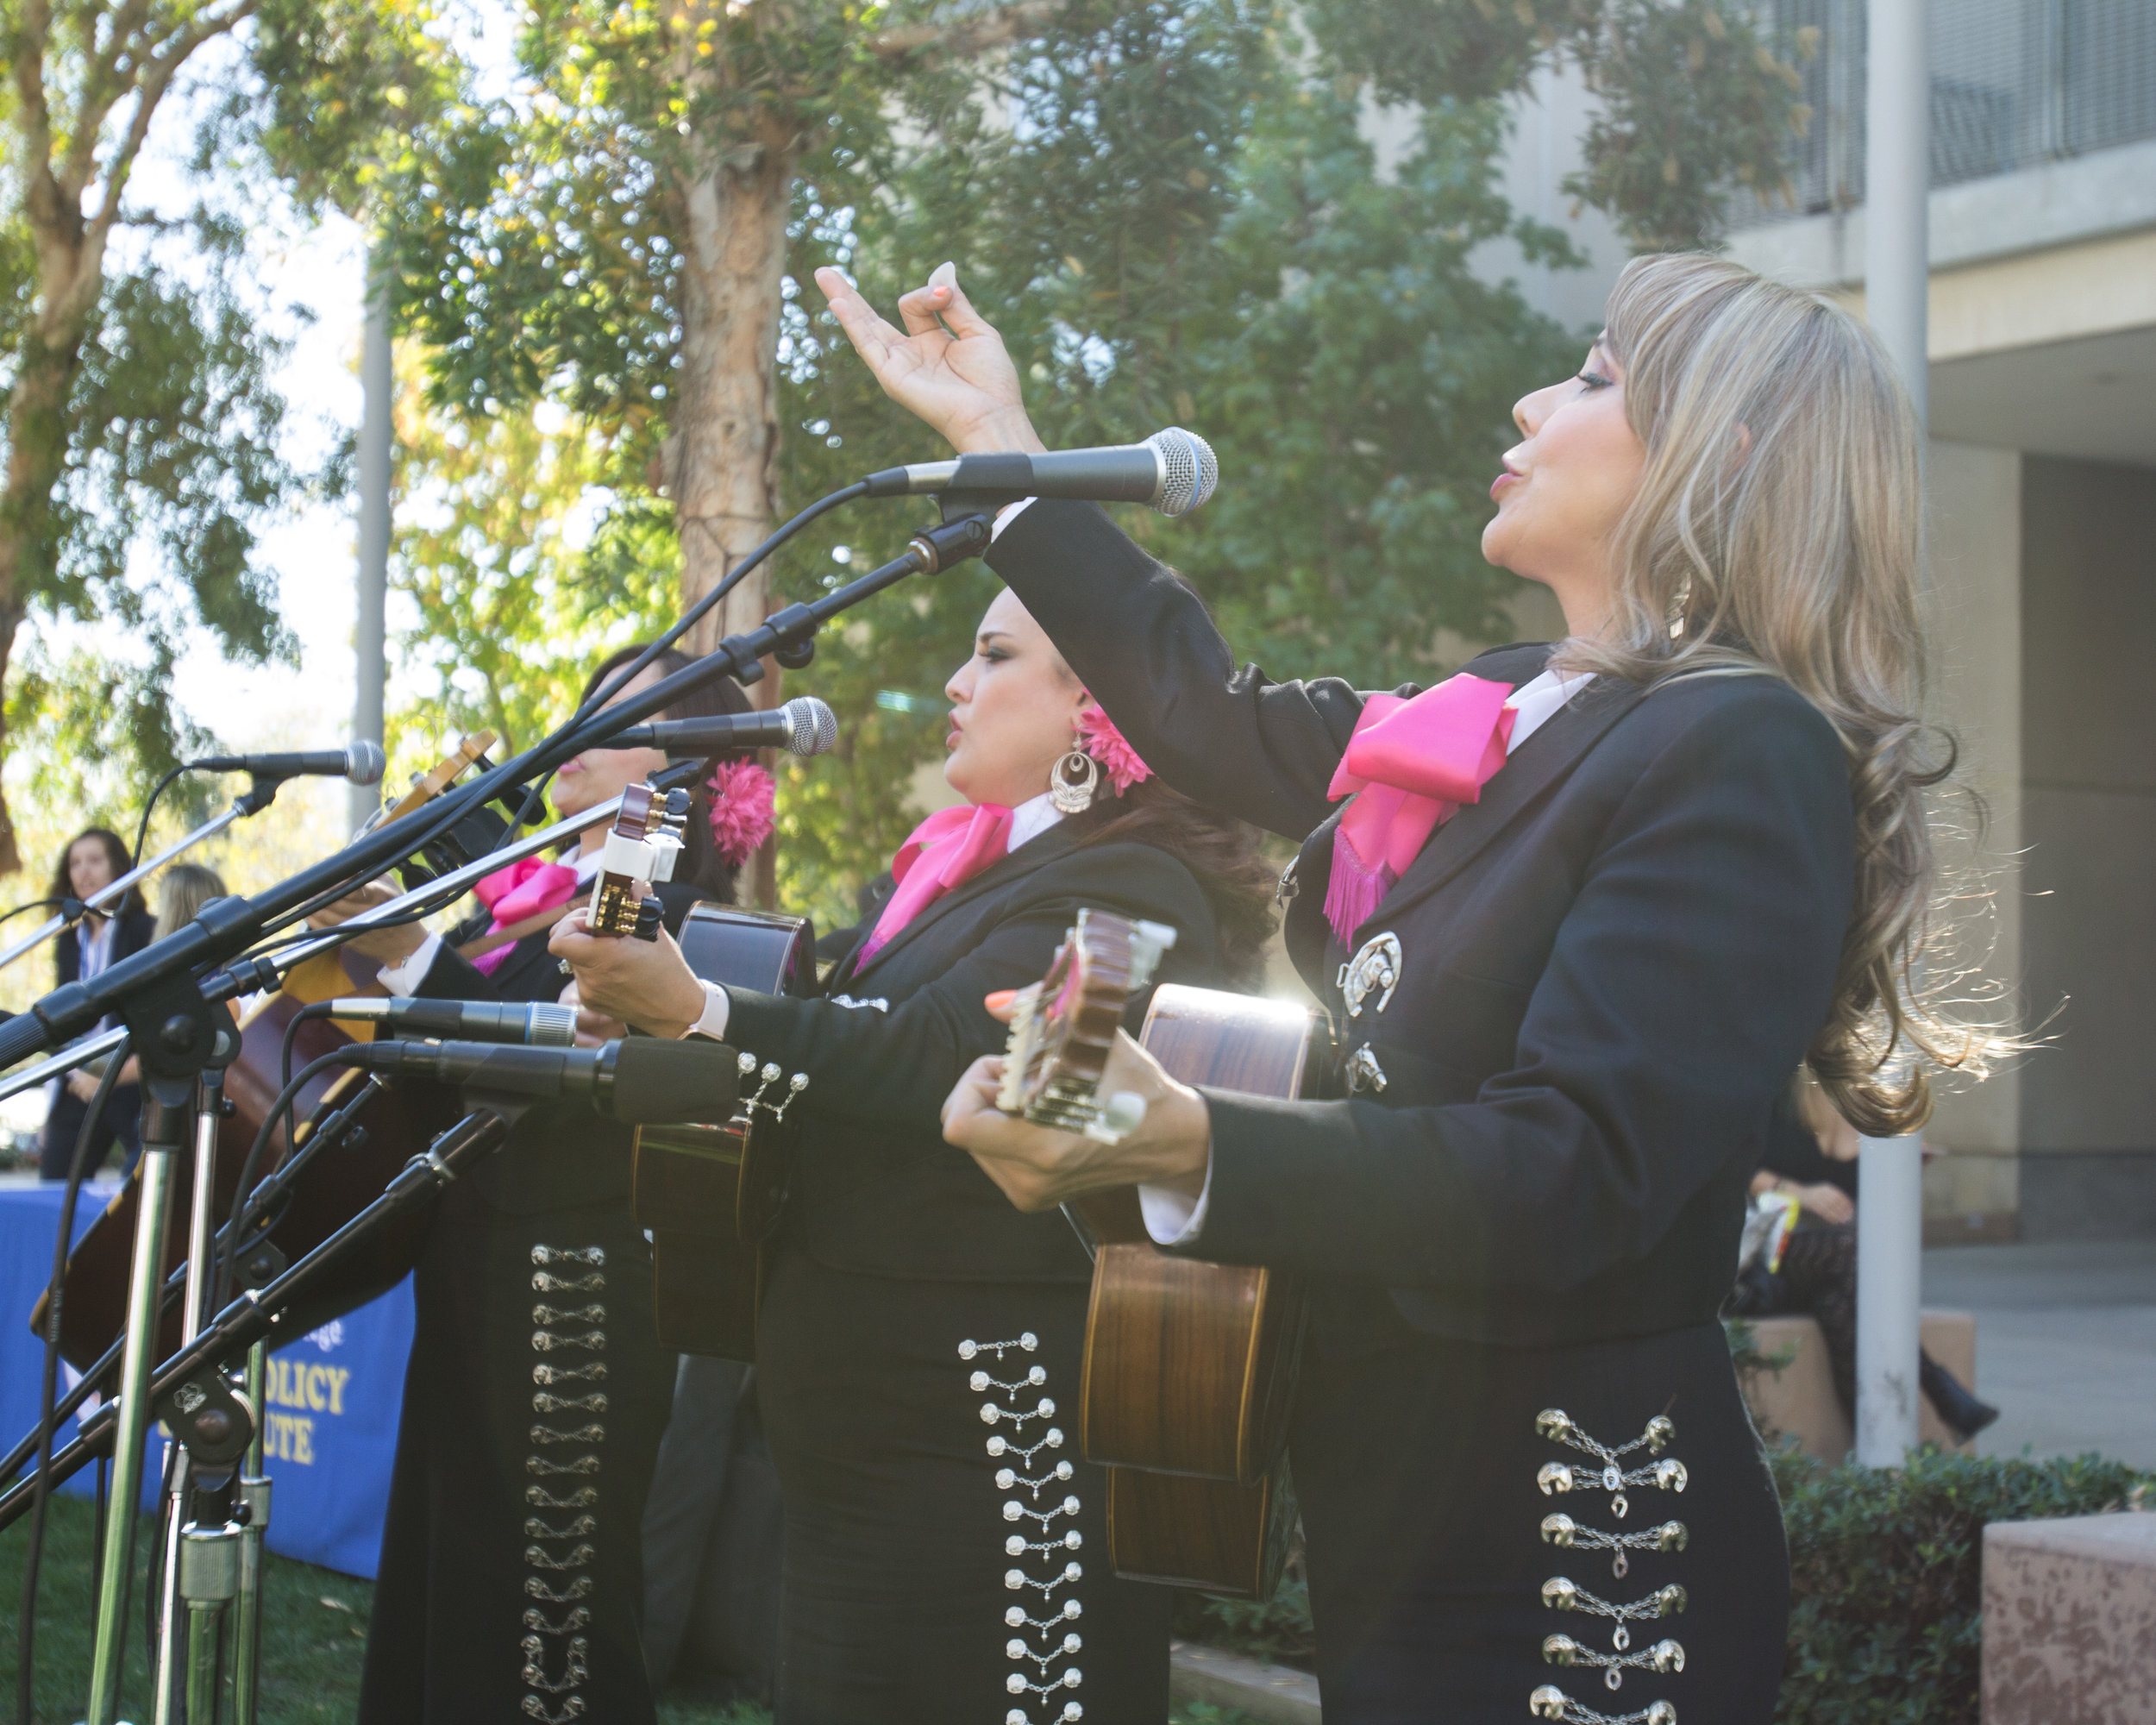  Mariachi band "Corazon De Mexico" performing cover of the song "El Rey" by Vicente Fernandez outside the quad area located at  Santa Monica College in Santa Monica California on Tuesday November 13th, 2018. (Jacob Victorica/ Corsair Photo) 